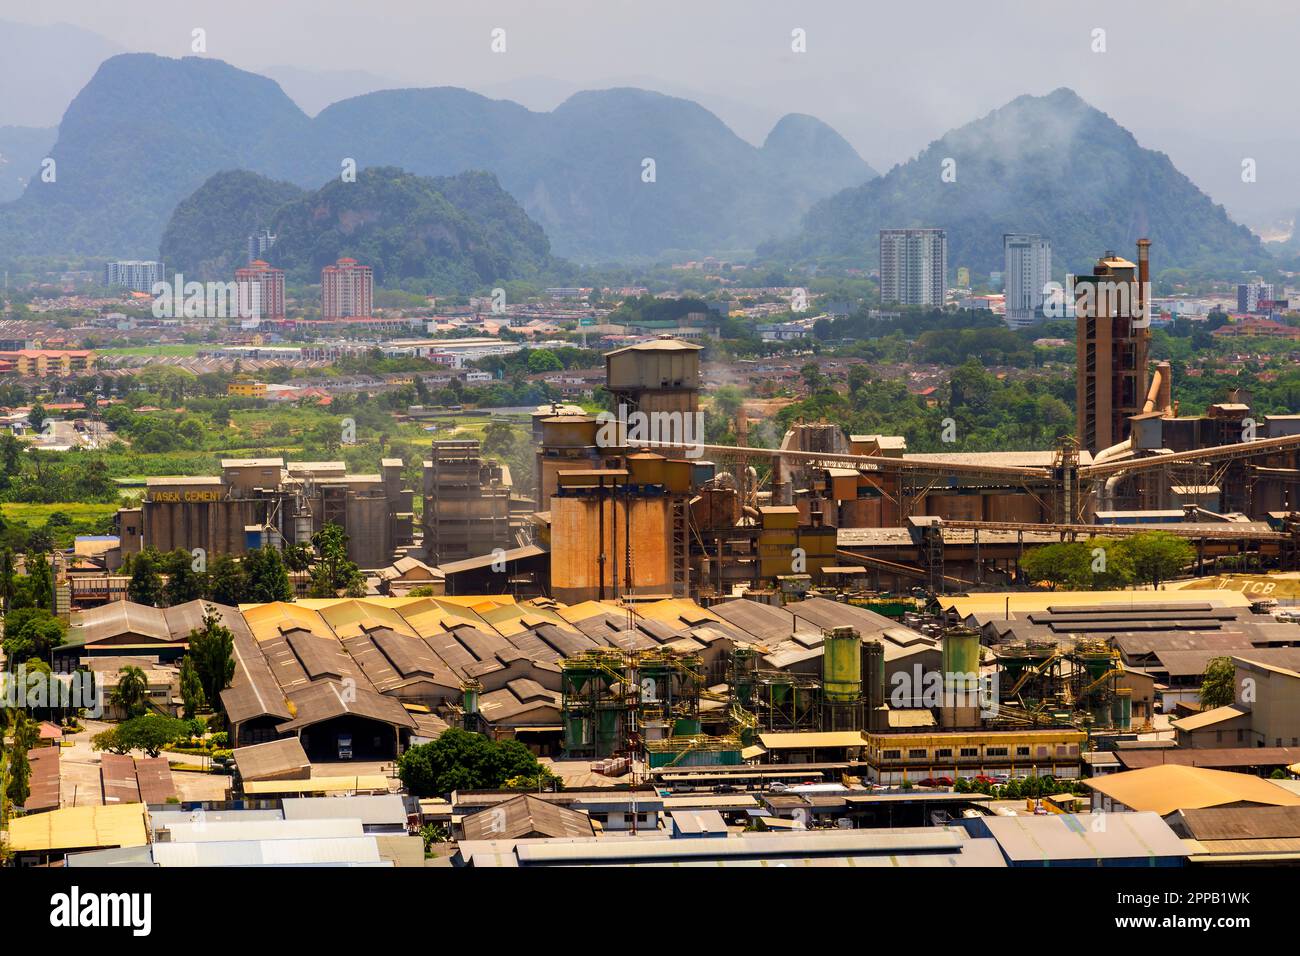 Elevated view of Ipoh and surrounding landscape at sunrise, Ipoh, Perak, Malaysia. Stock Photo